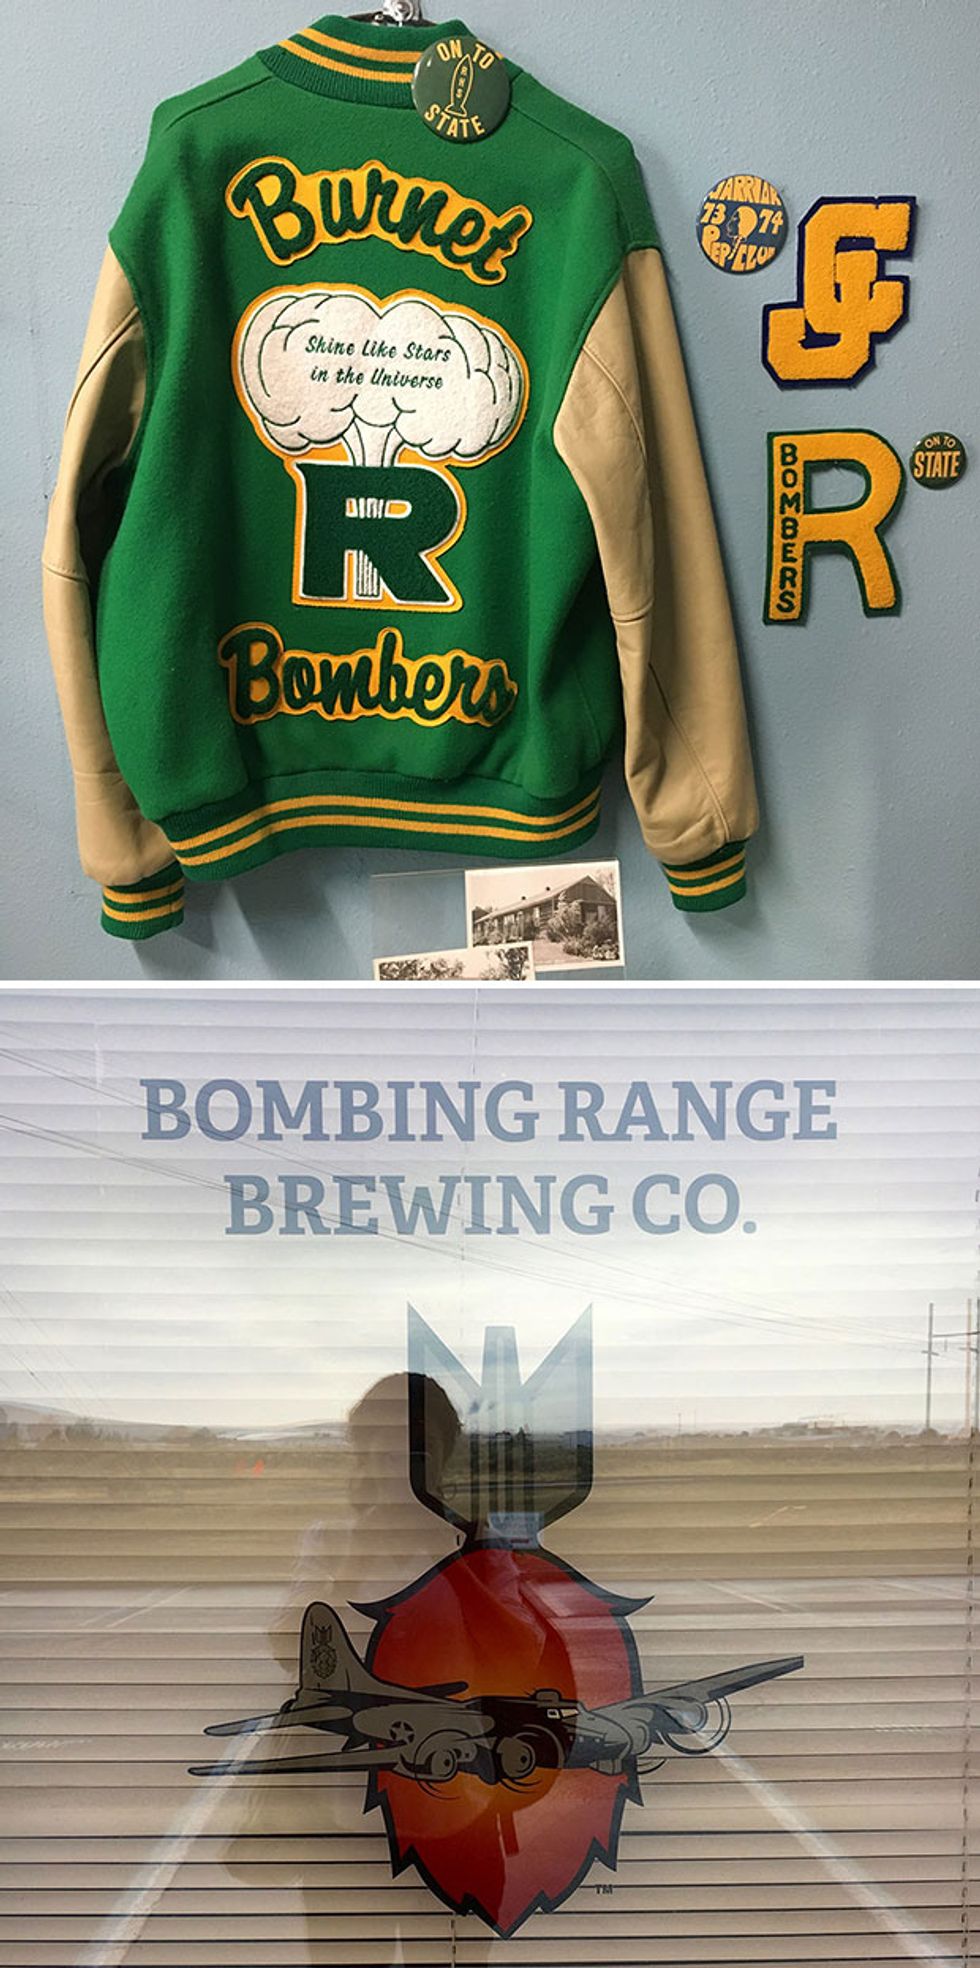 Top: A letterman jacket is on display at the gift shop adjoining the B Reactor visitor center in Richland, Wash. Bottom: Craft breweries around Richland, Wash., use nuclear iconography in a nod to the nearby Hanford Site.